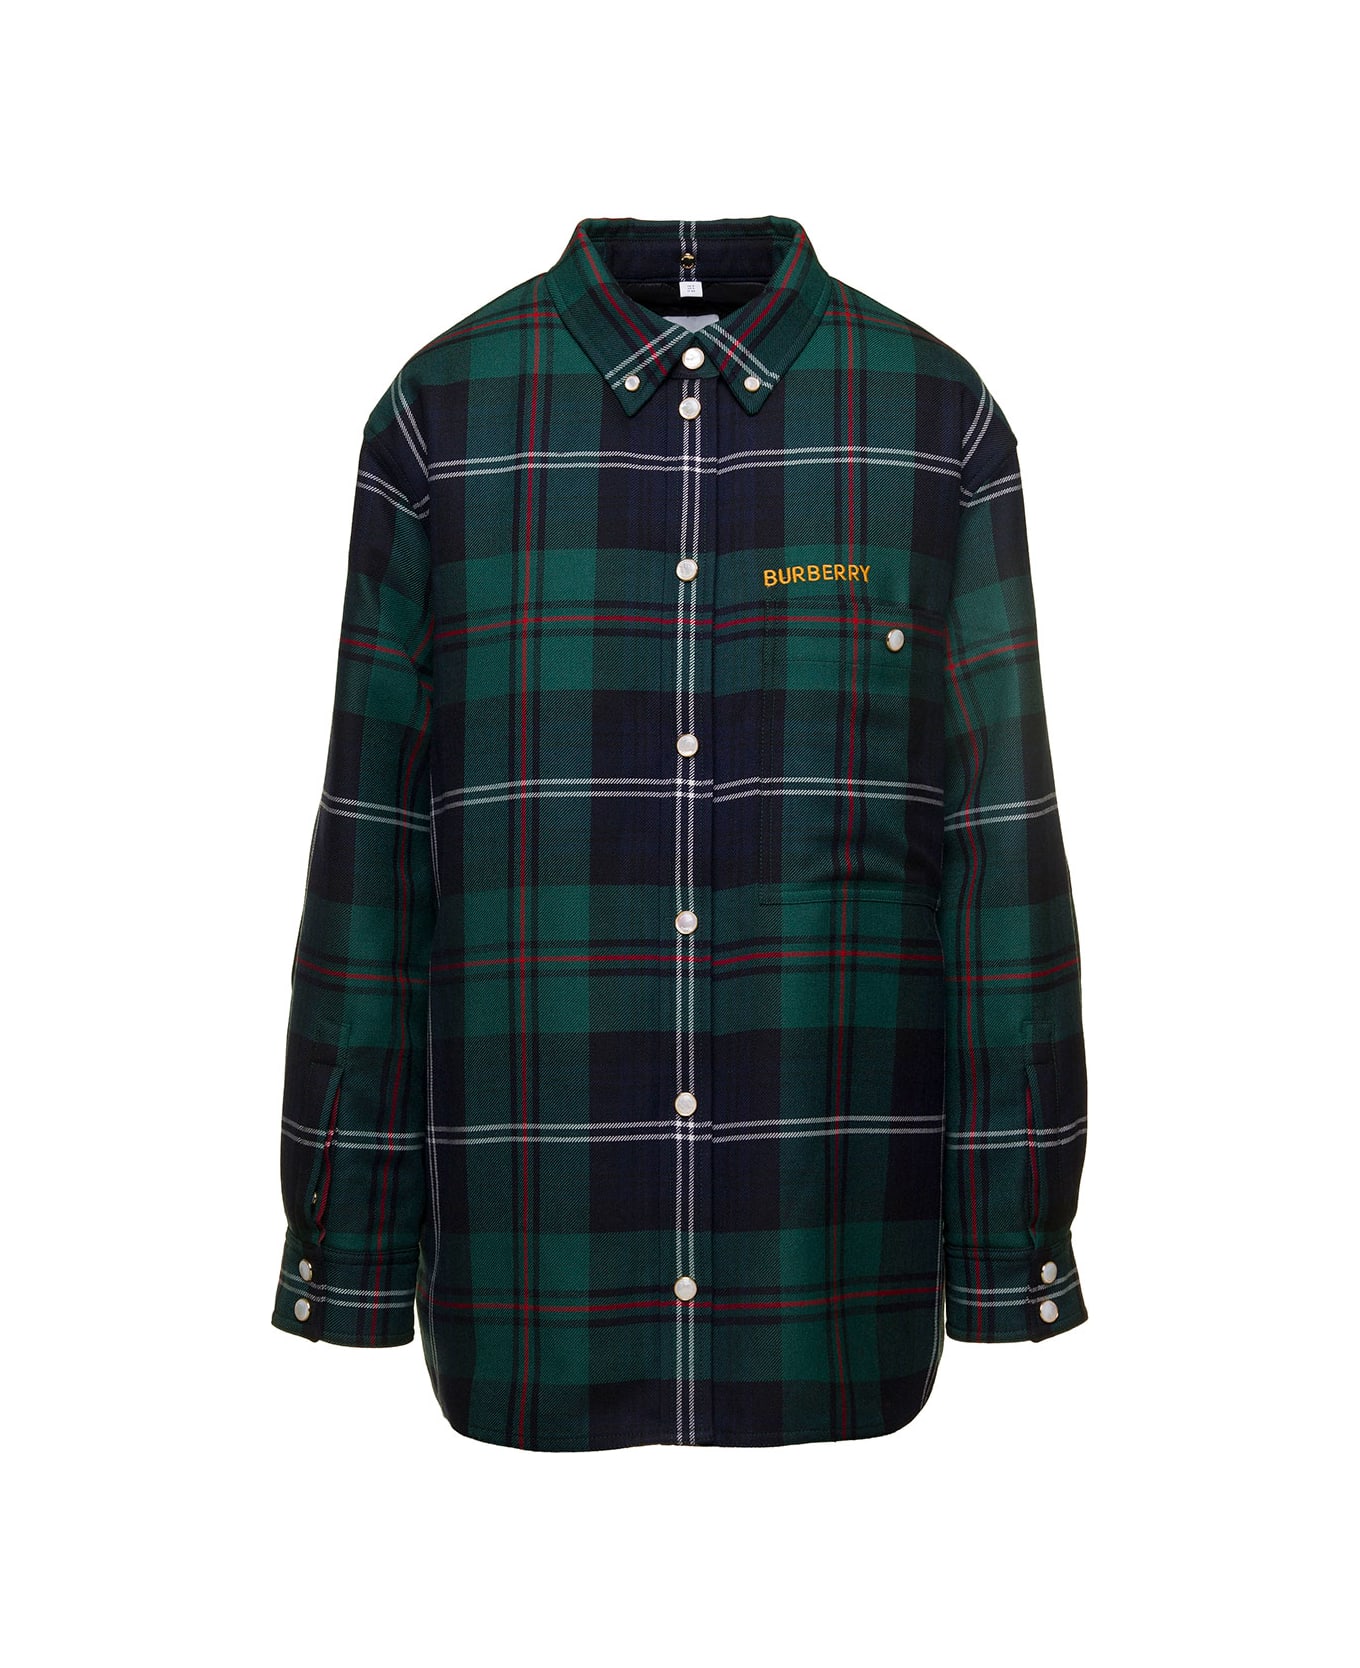 Burberry W Woven Tops - Green